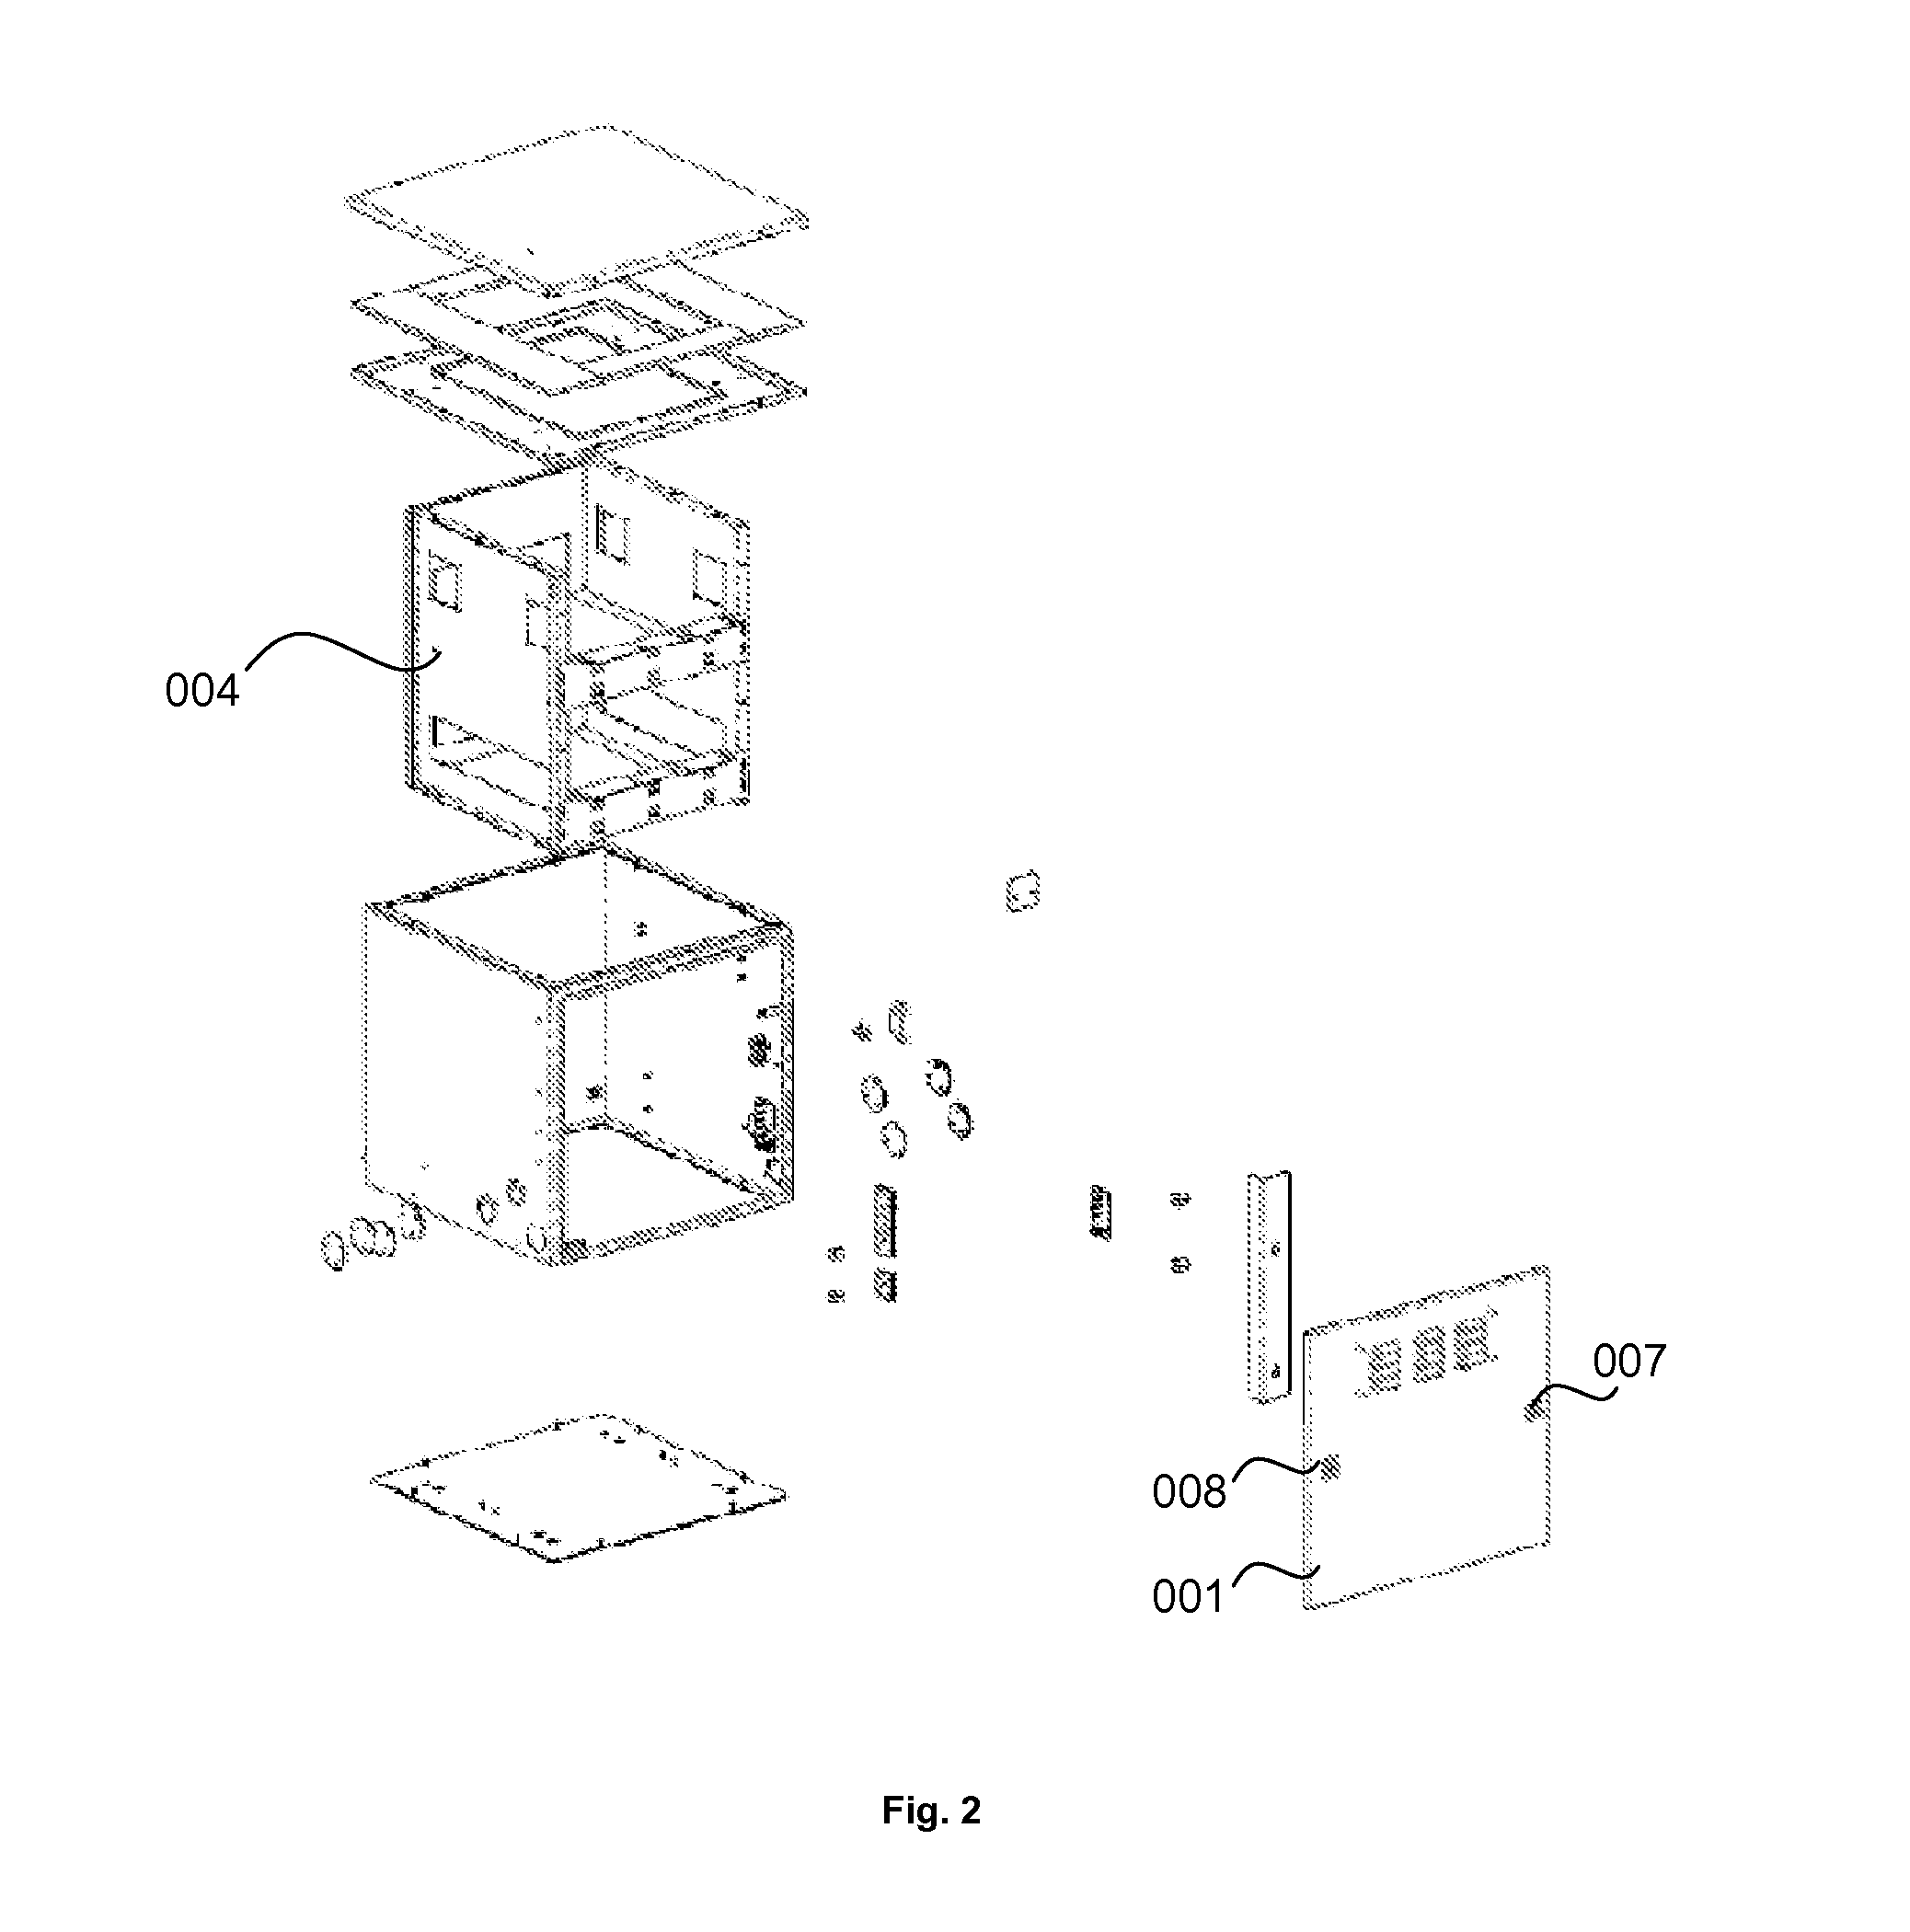 Electronic device and battery enclosure